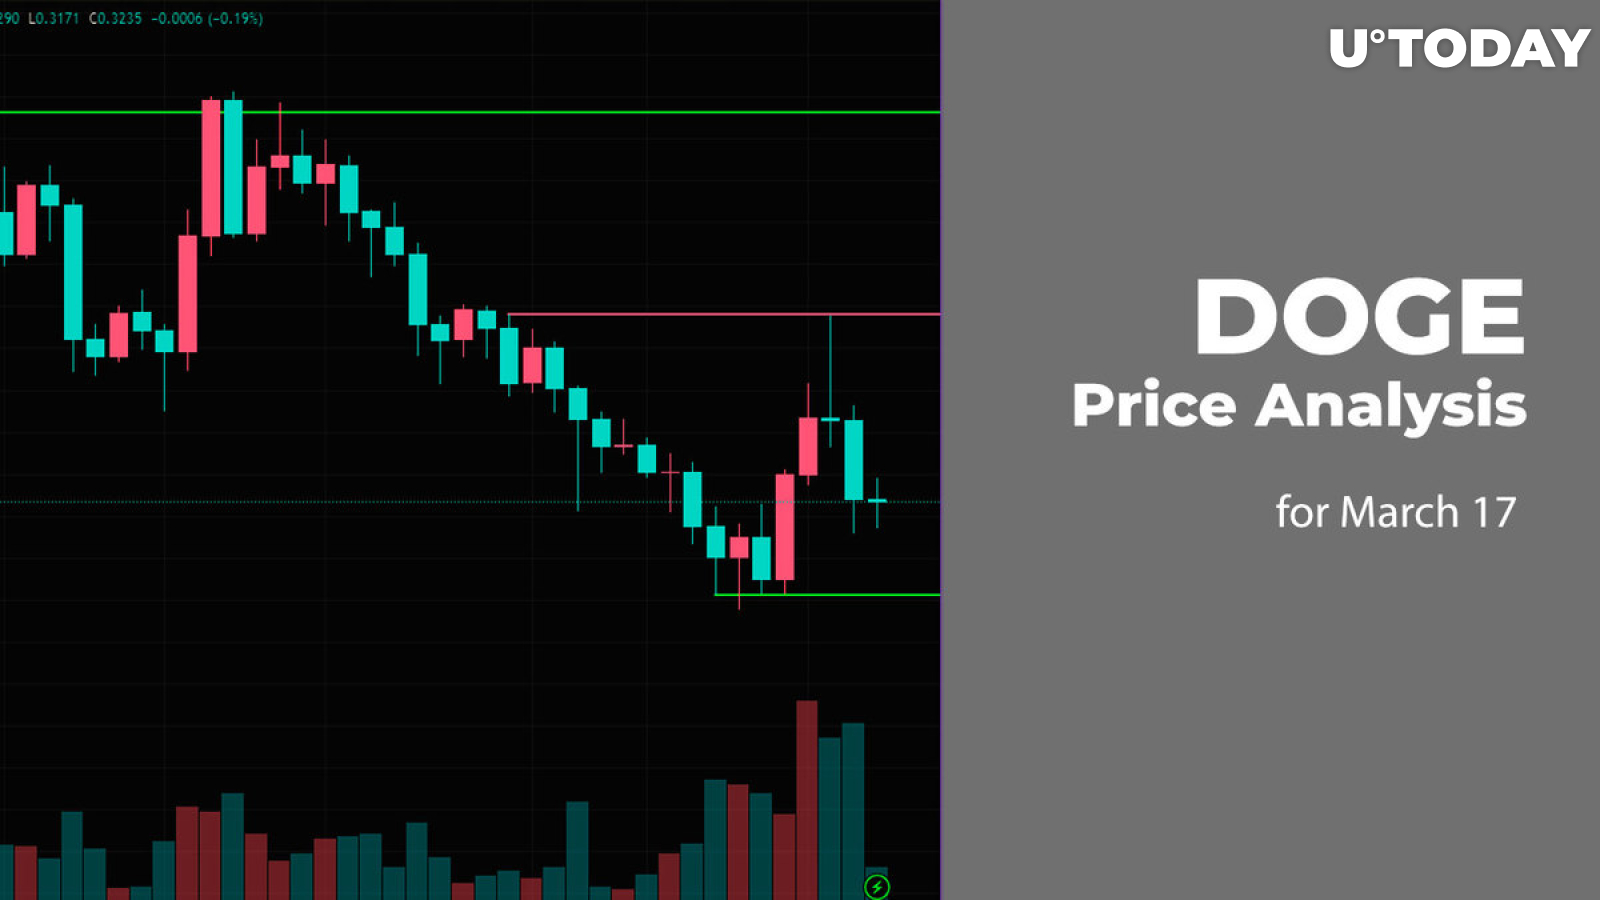 DOGE Price Analysis for March 17